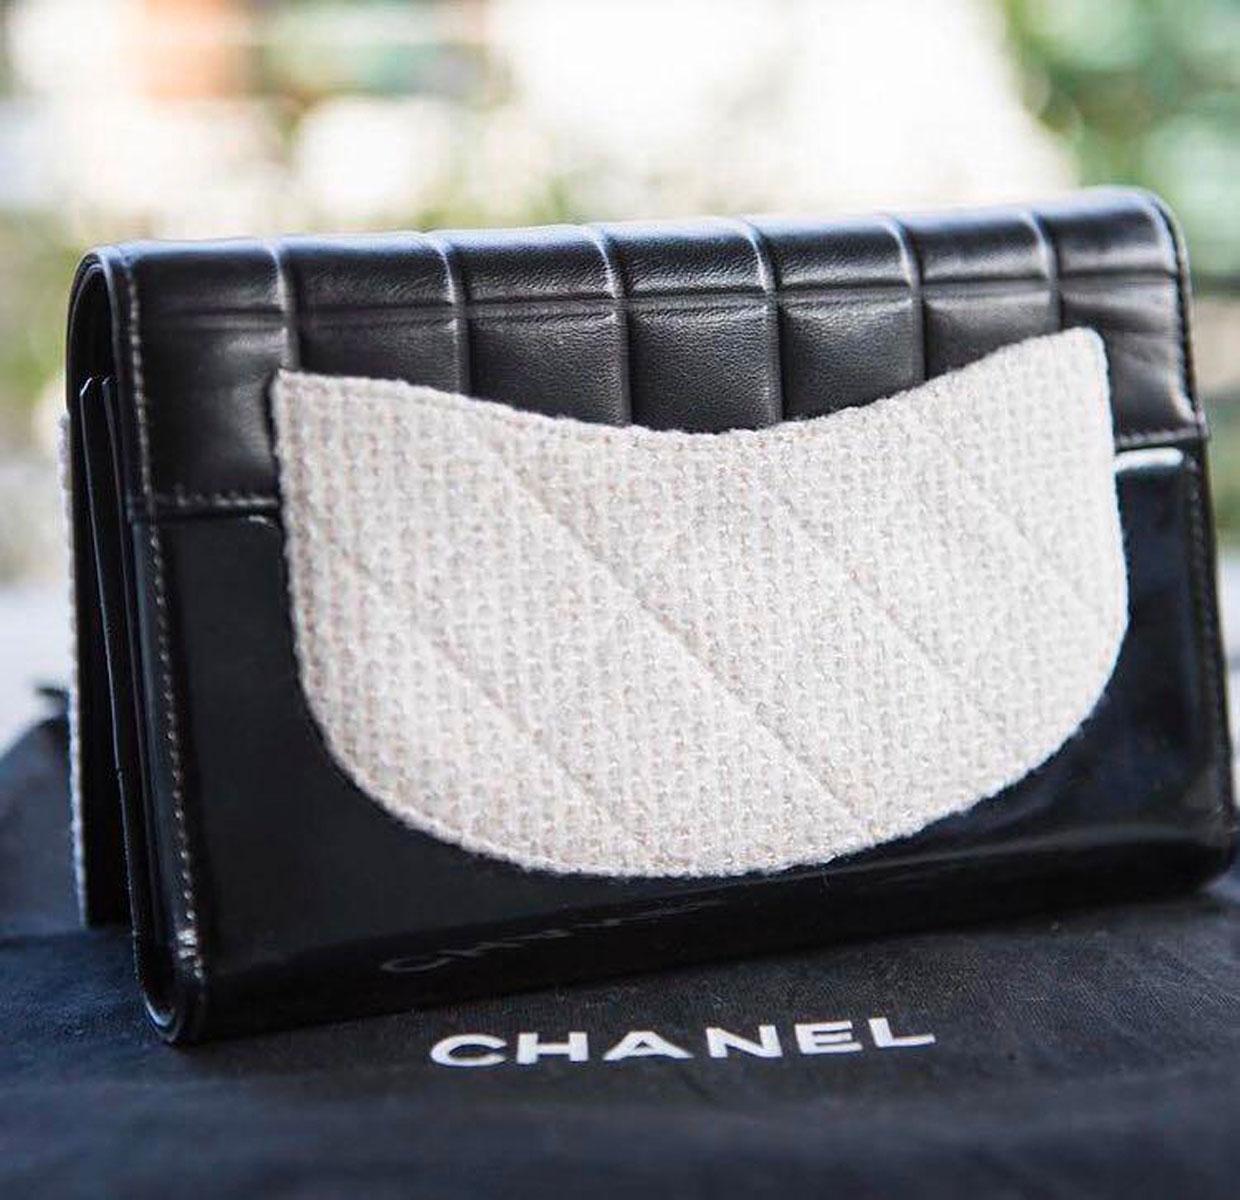 Chanel Timeless Tweed Iconic Camelia Flower Bicolor Black & White Leather Clutch For Sale 6